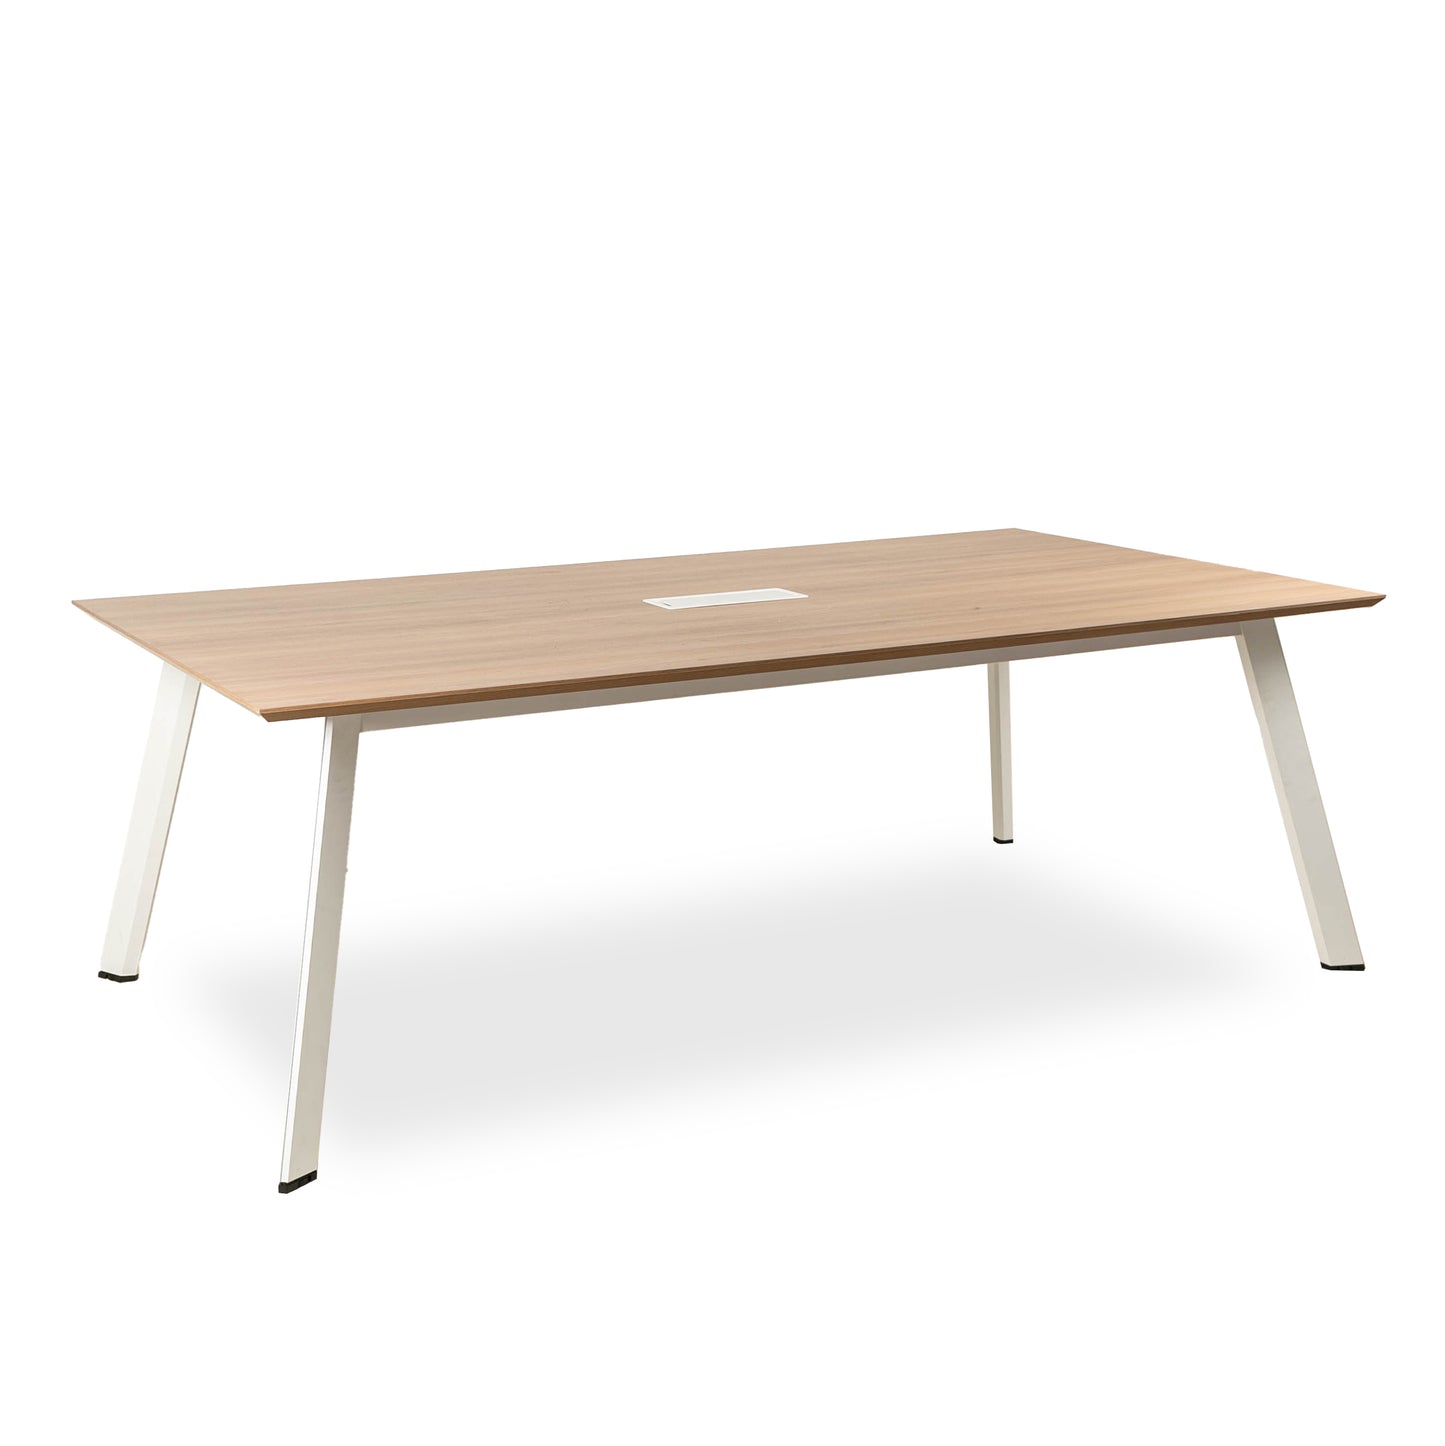 Load image into Gallery viewer, Comet Meeting Table - ContractWorld Furniture